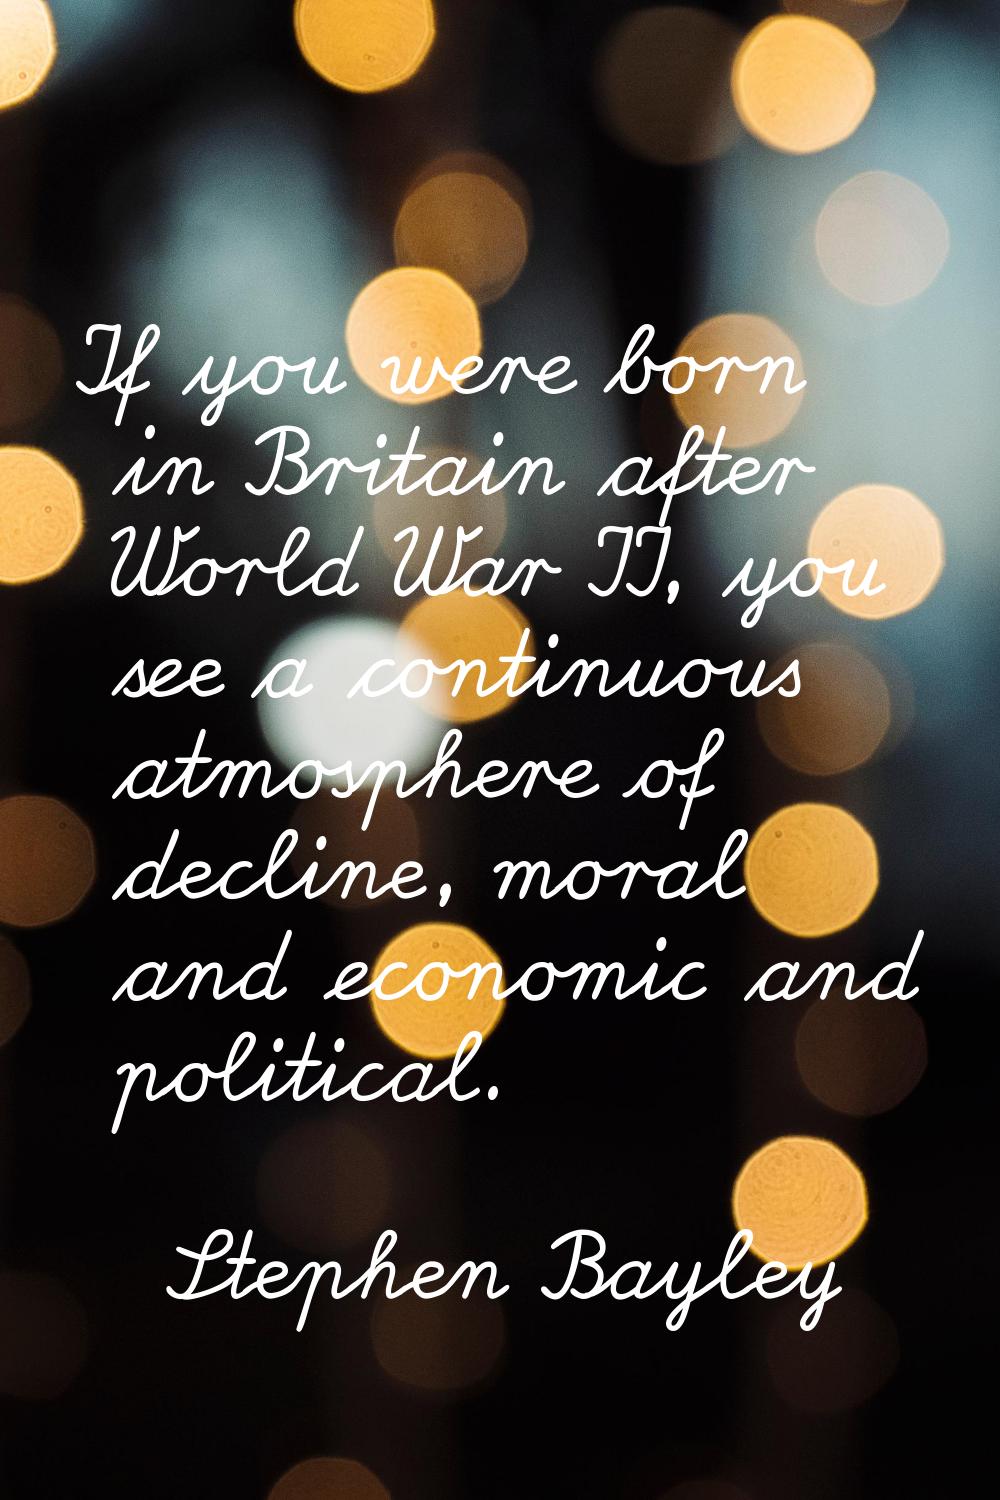 If you were born in Britain after World War II, you see a continuous atmosphere of decline, moral a